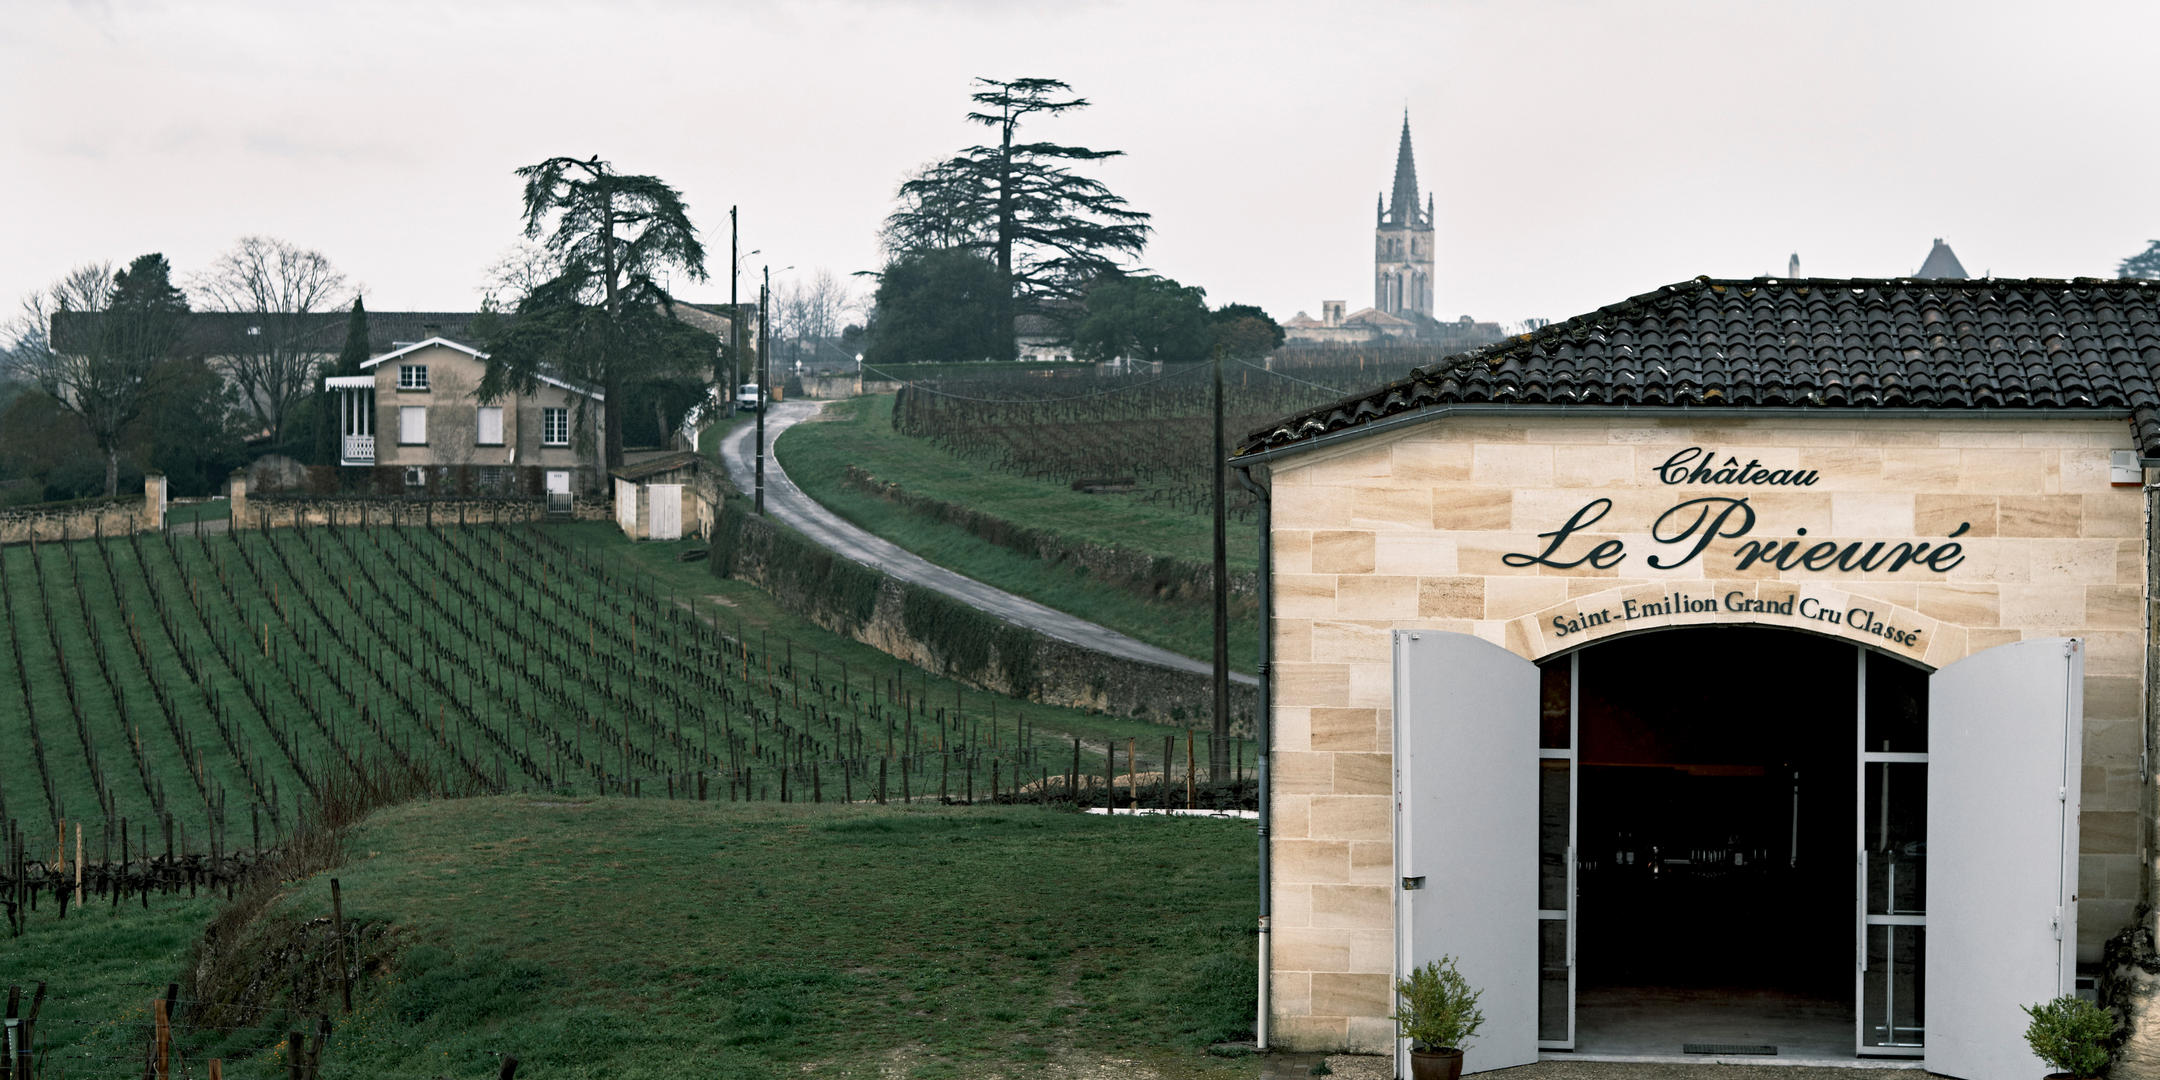 Ch. Le Prieuré, one of Max Lalondrelle's five to watch in 2021, is located not far from St Emilion.